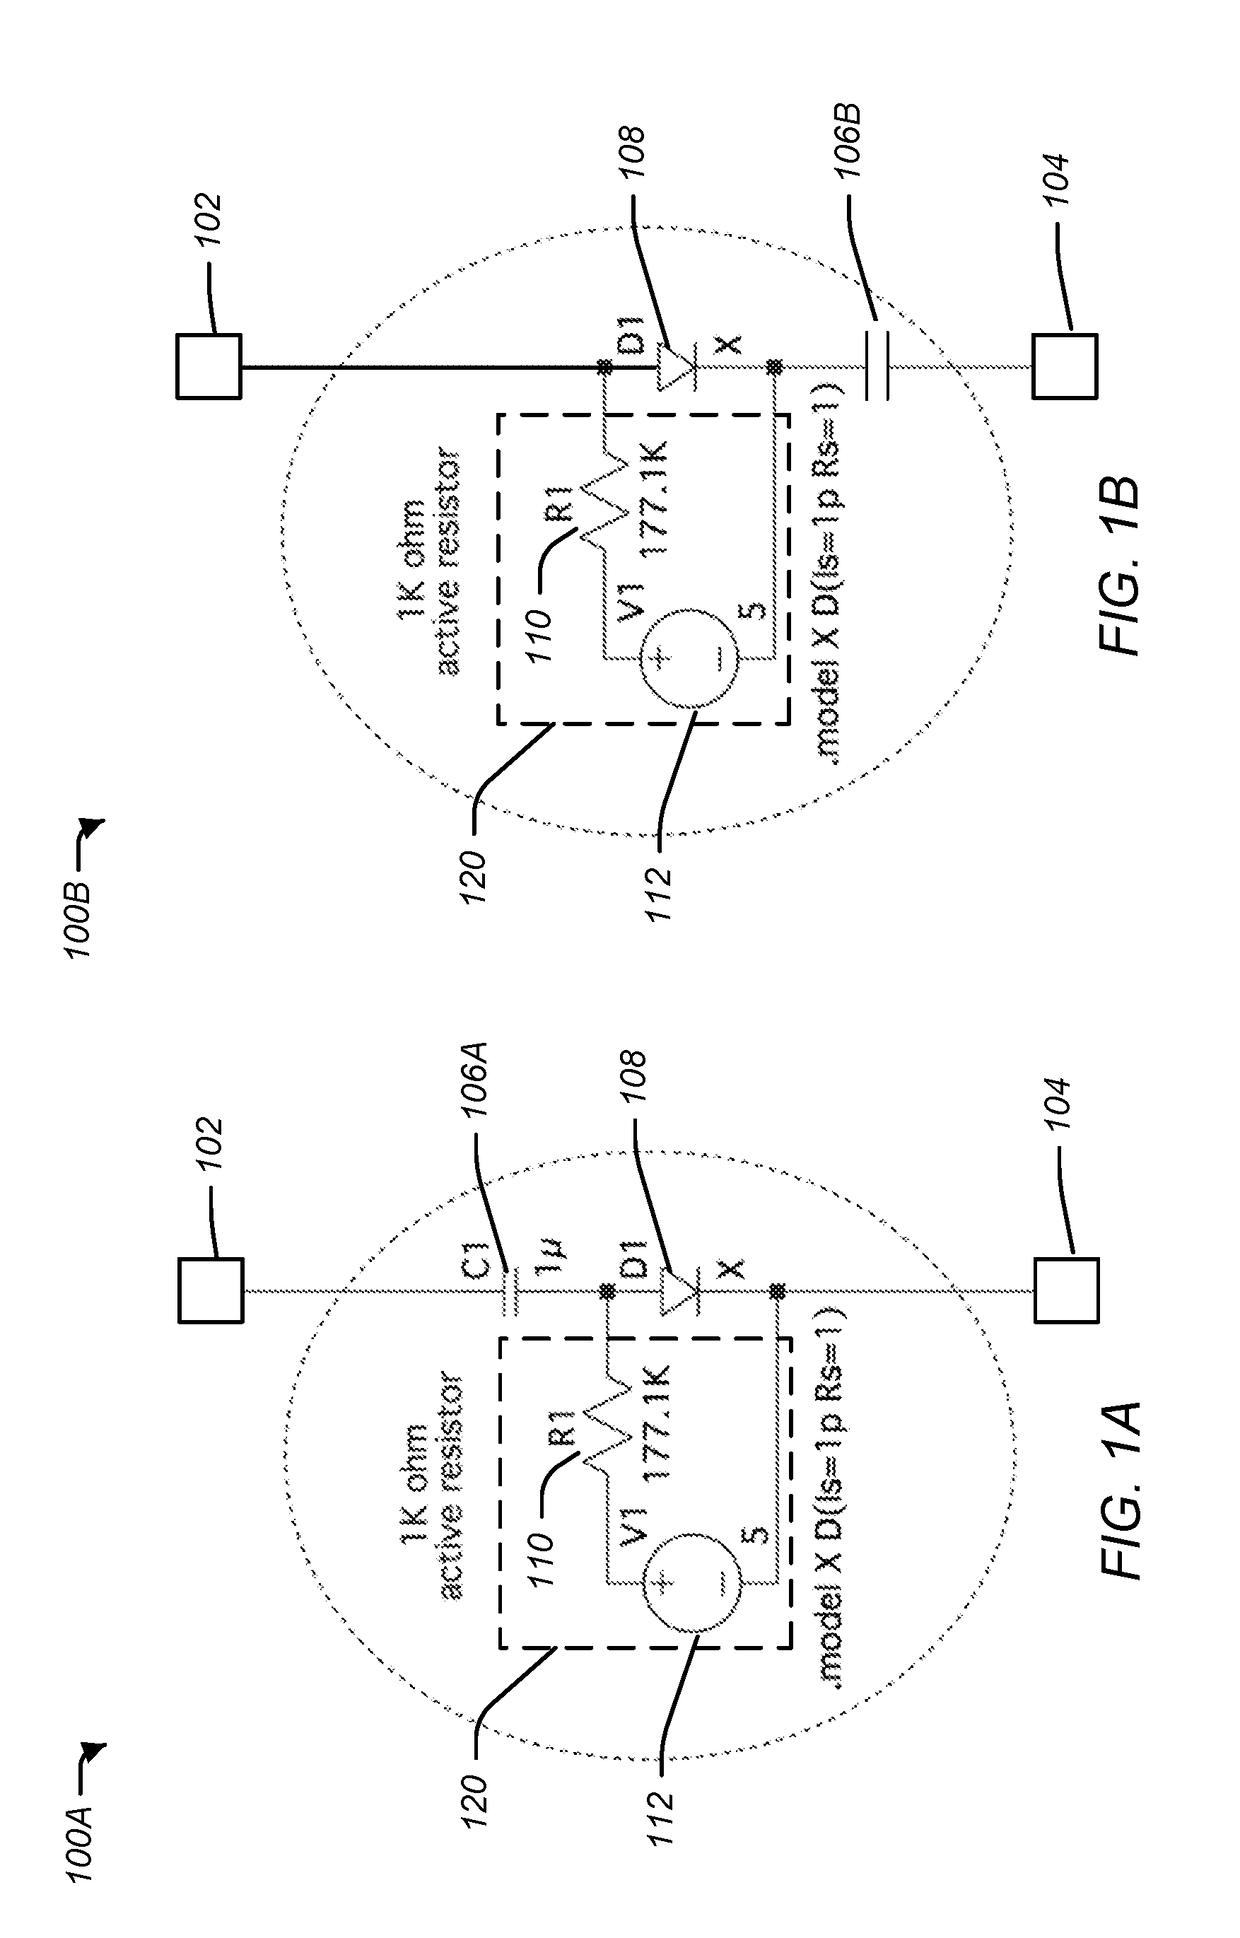 Active differential resistors with reduced noise